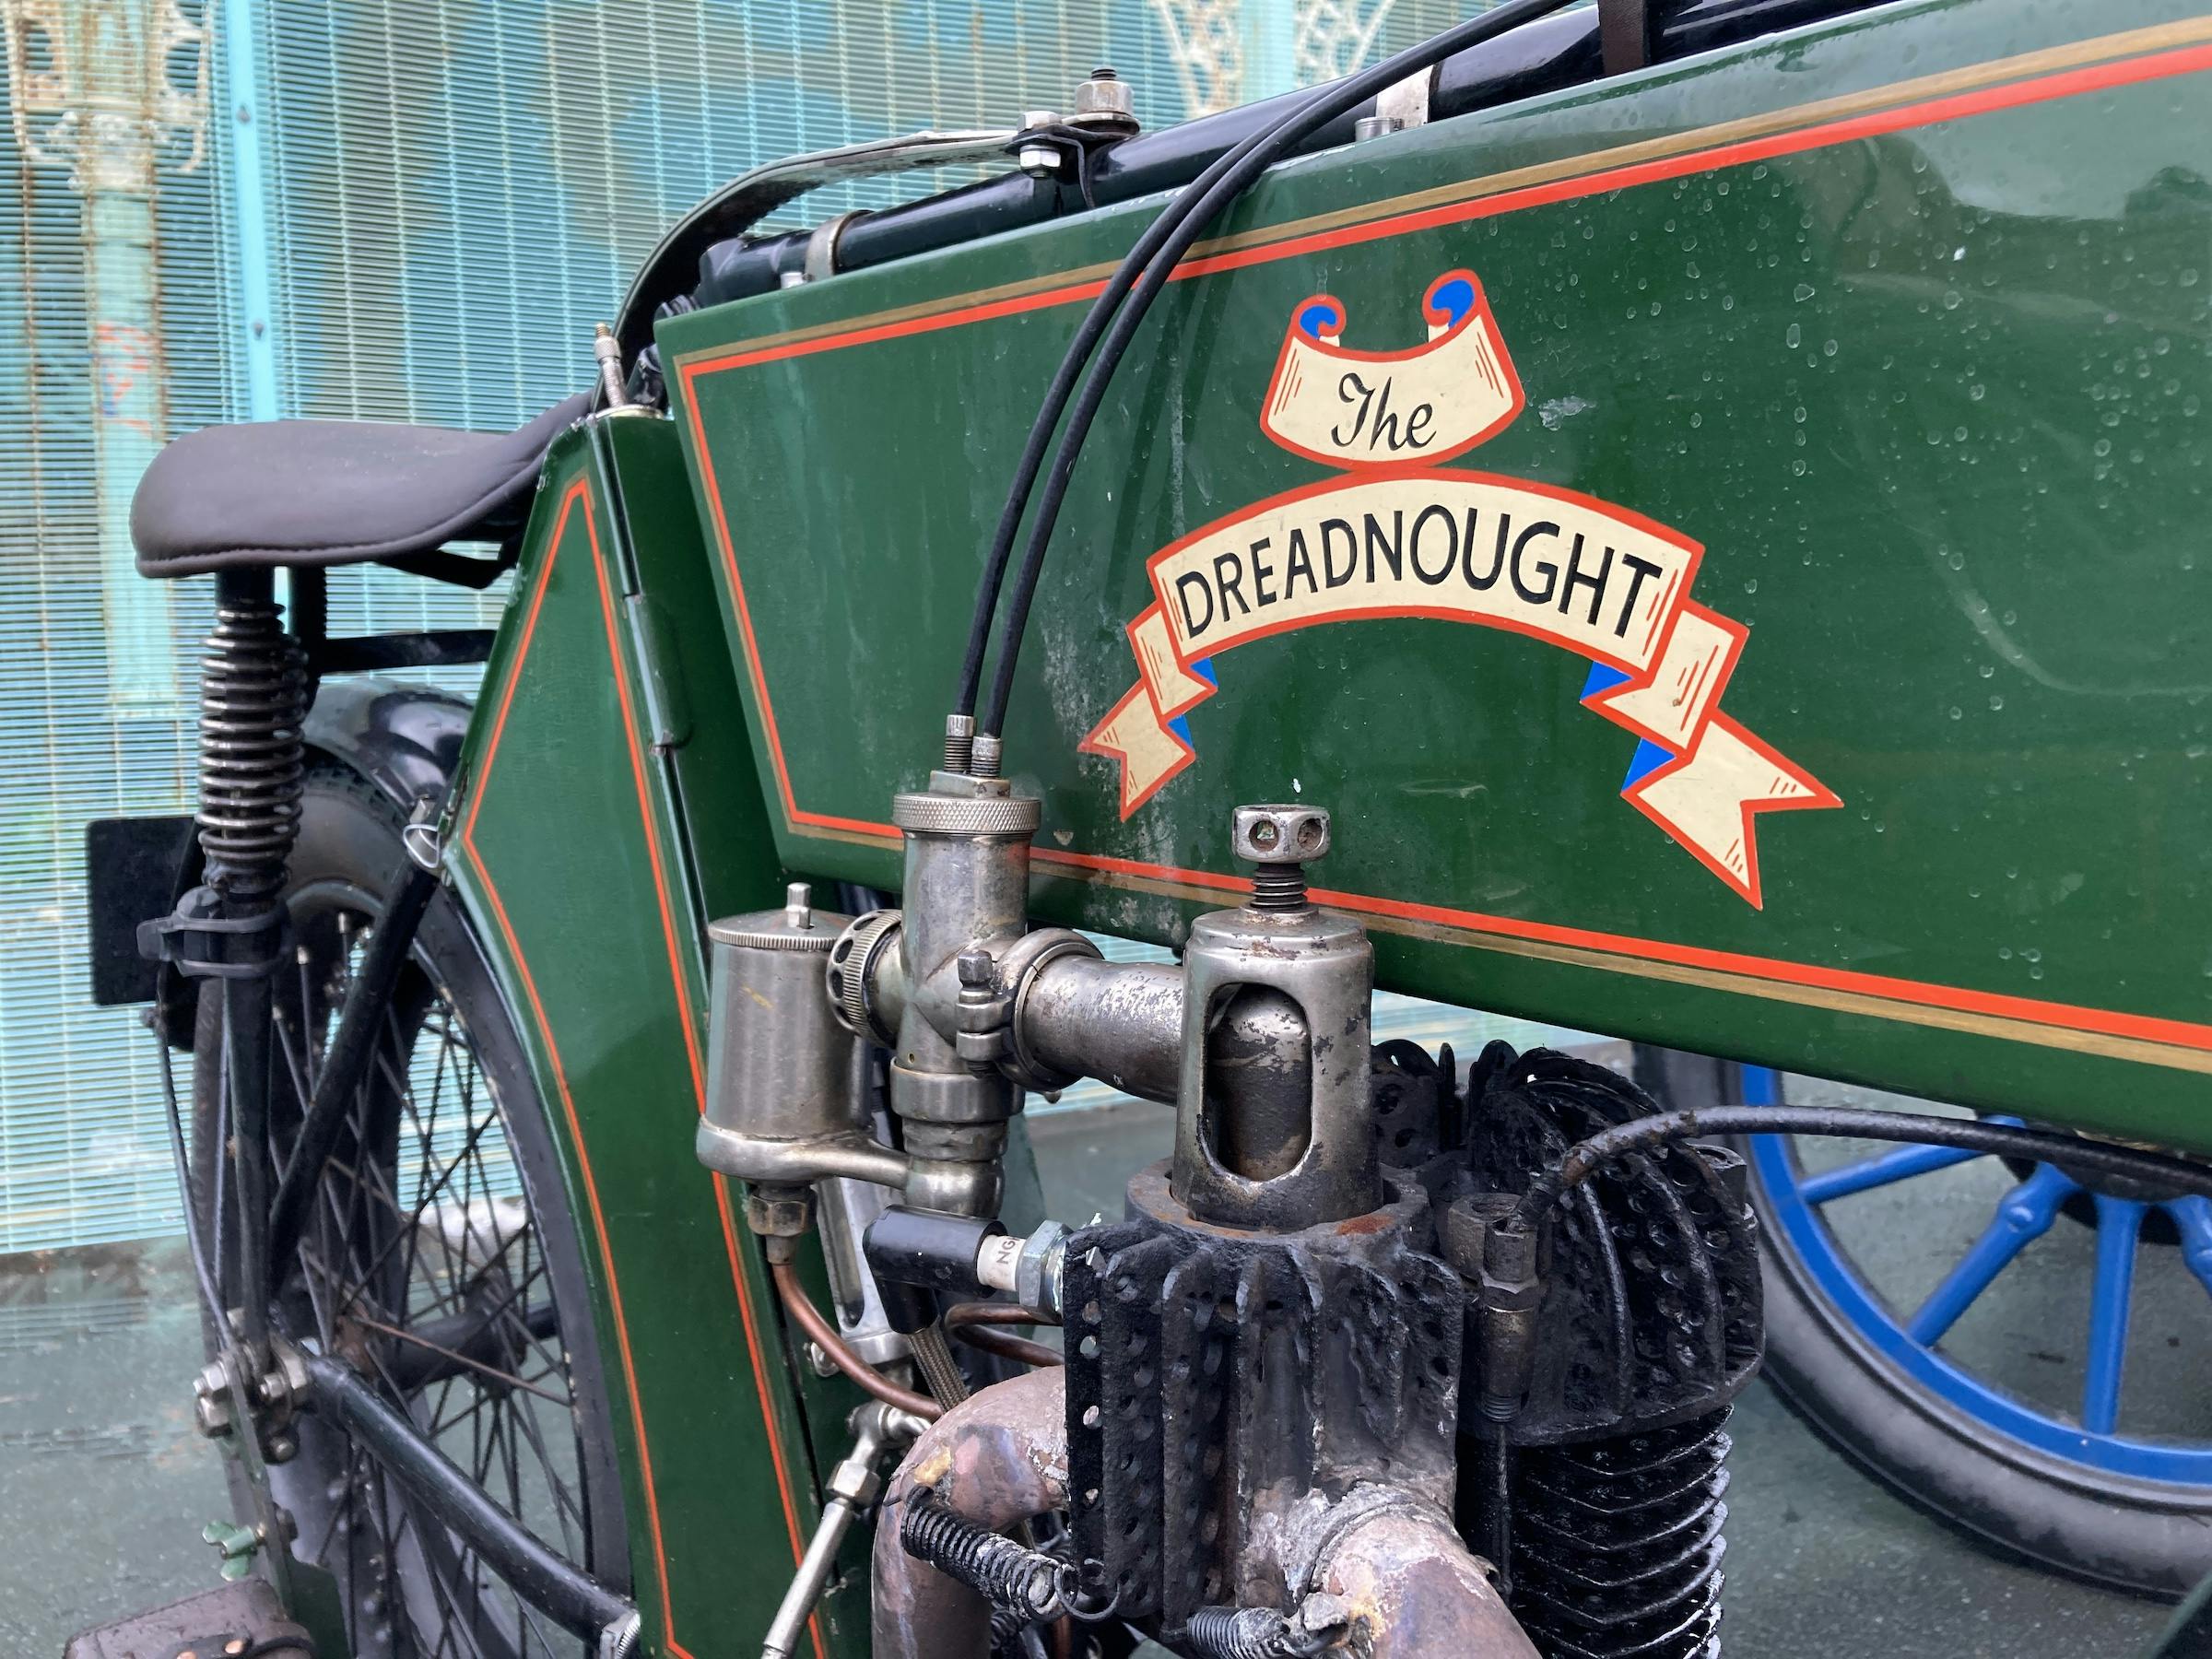 1904 Dreadnought motorbike paint work body decal